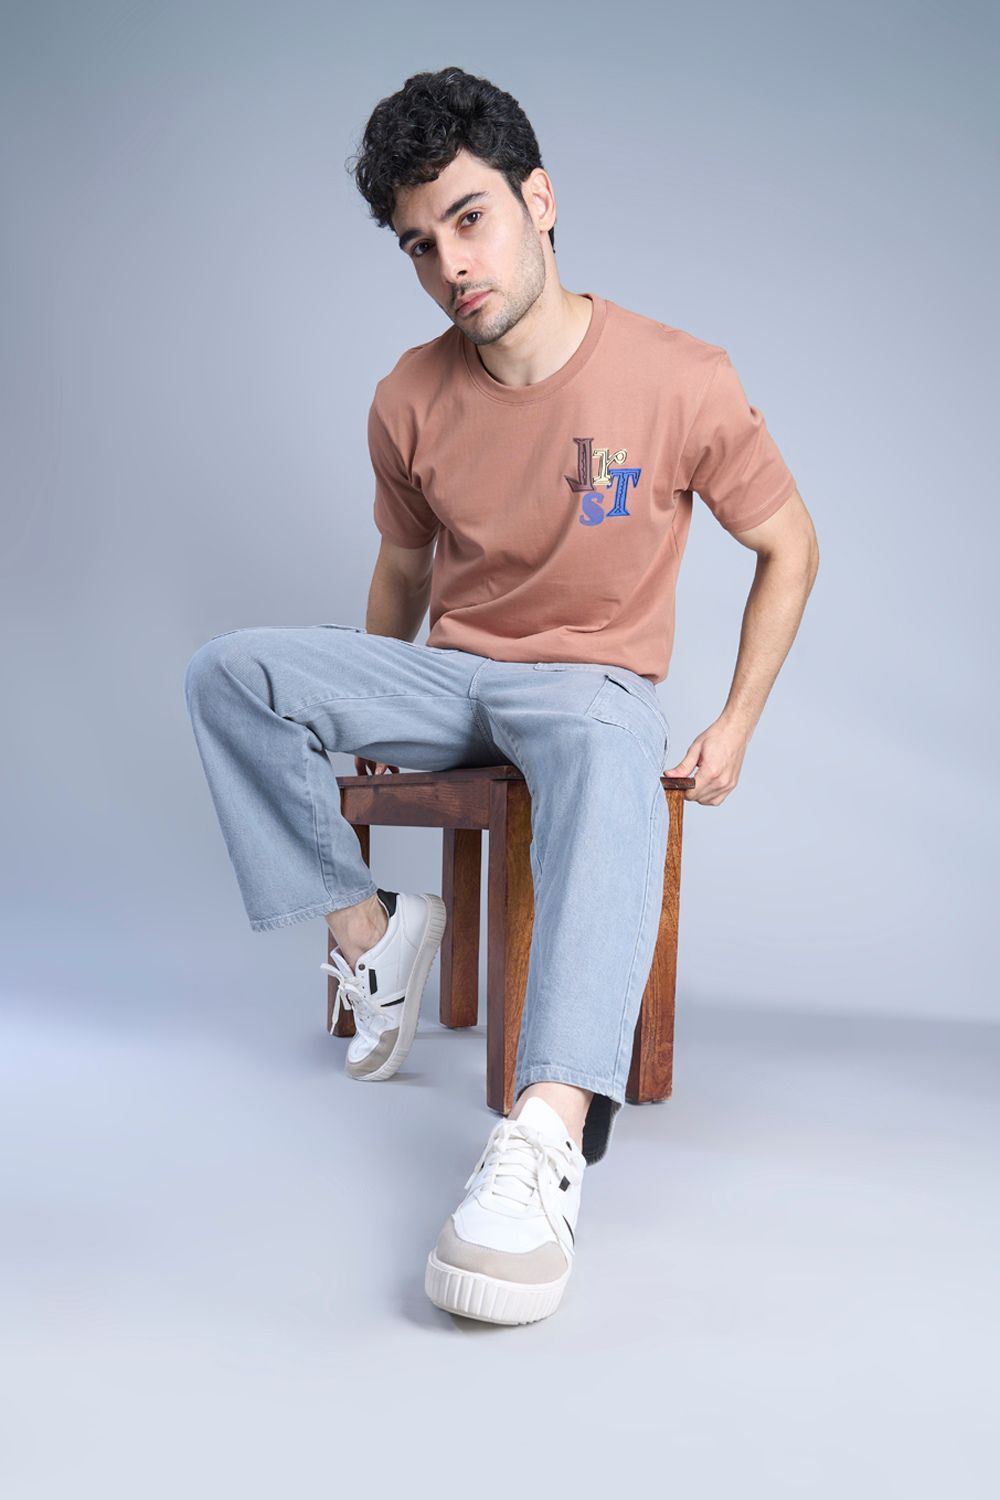 Cotton oversized T shirt for men in the solid color Café cream with half sleeves and crew neck.